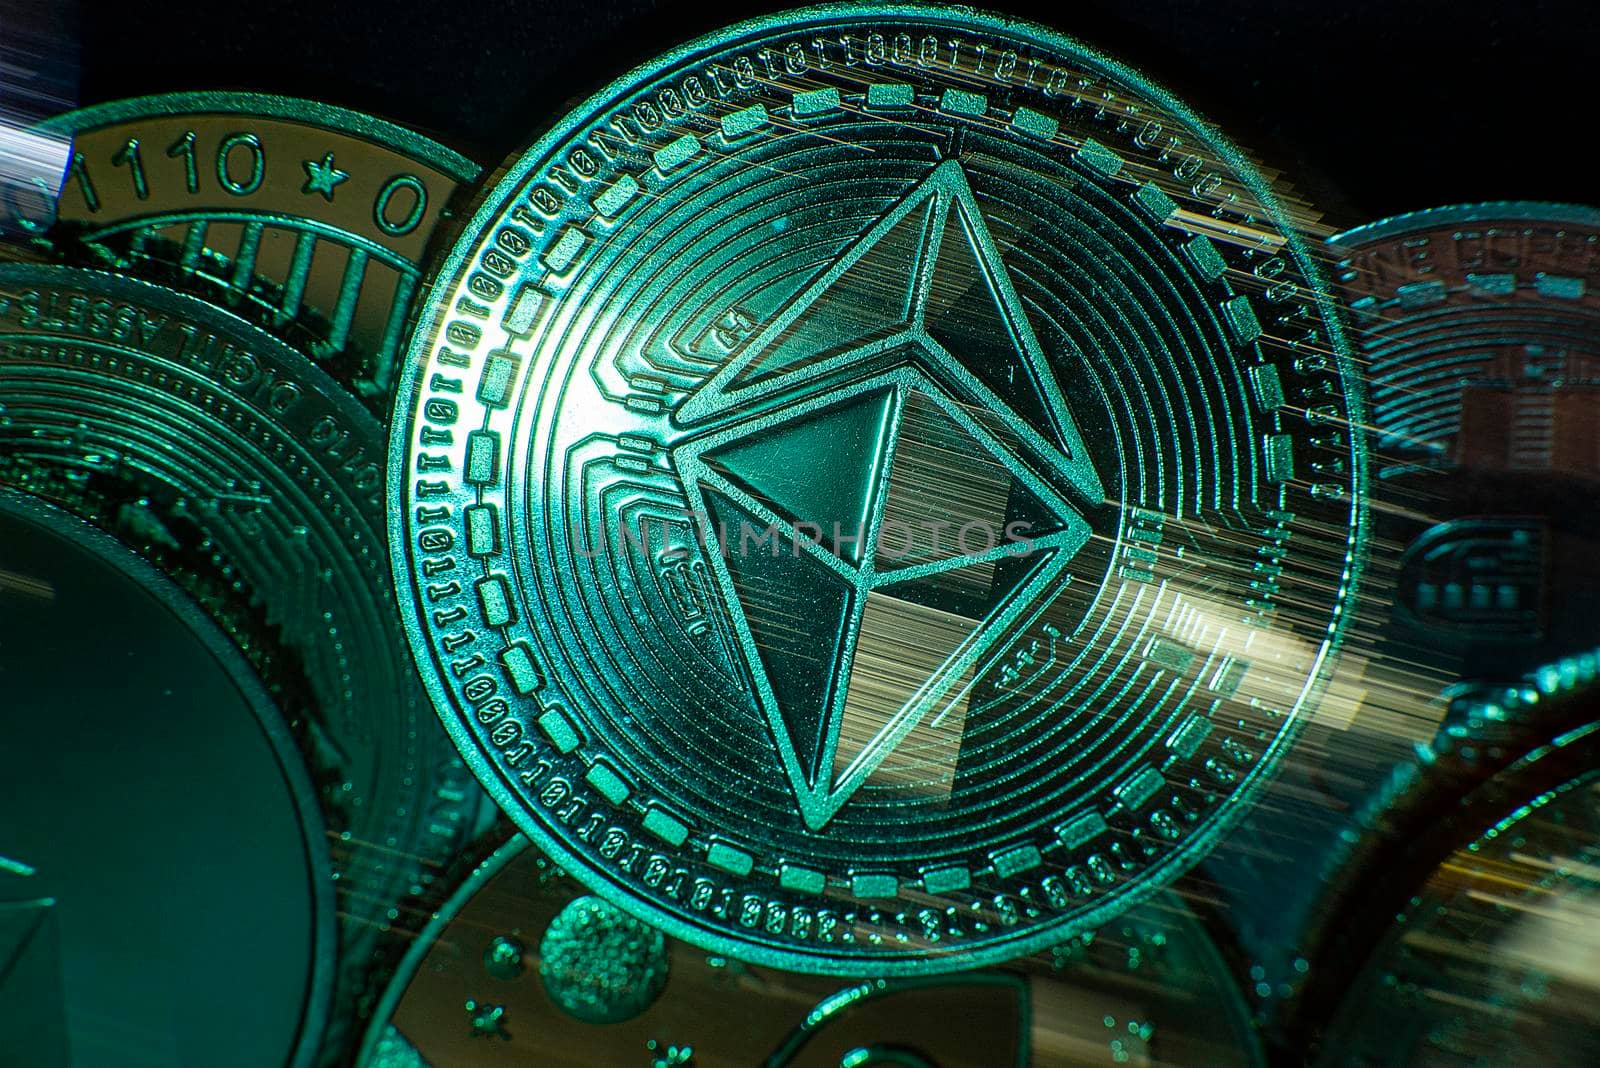 Horizontal view of cryptocurrency tokens including Ethereum seen from above on a black background with light trails. High quality photo